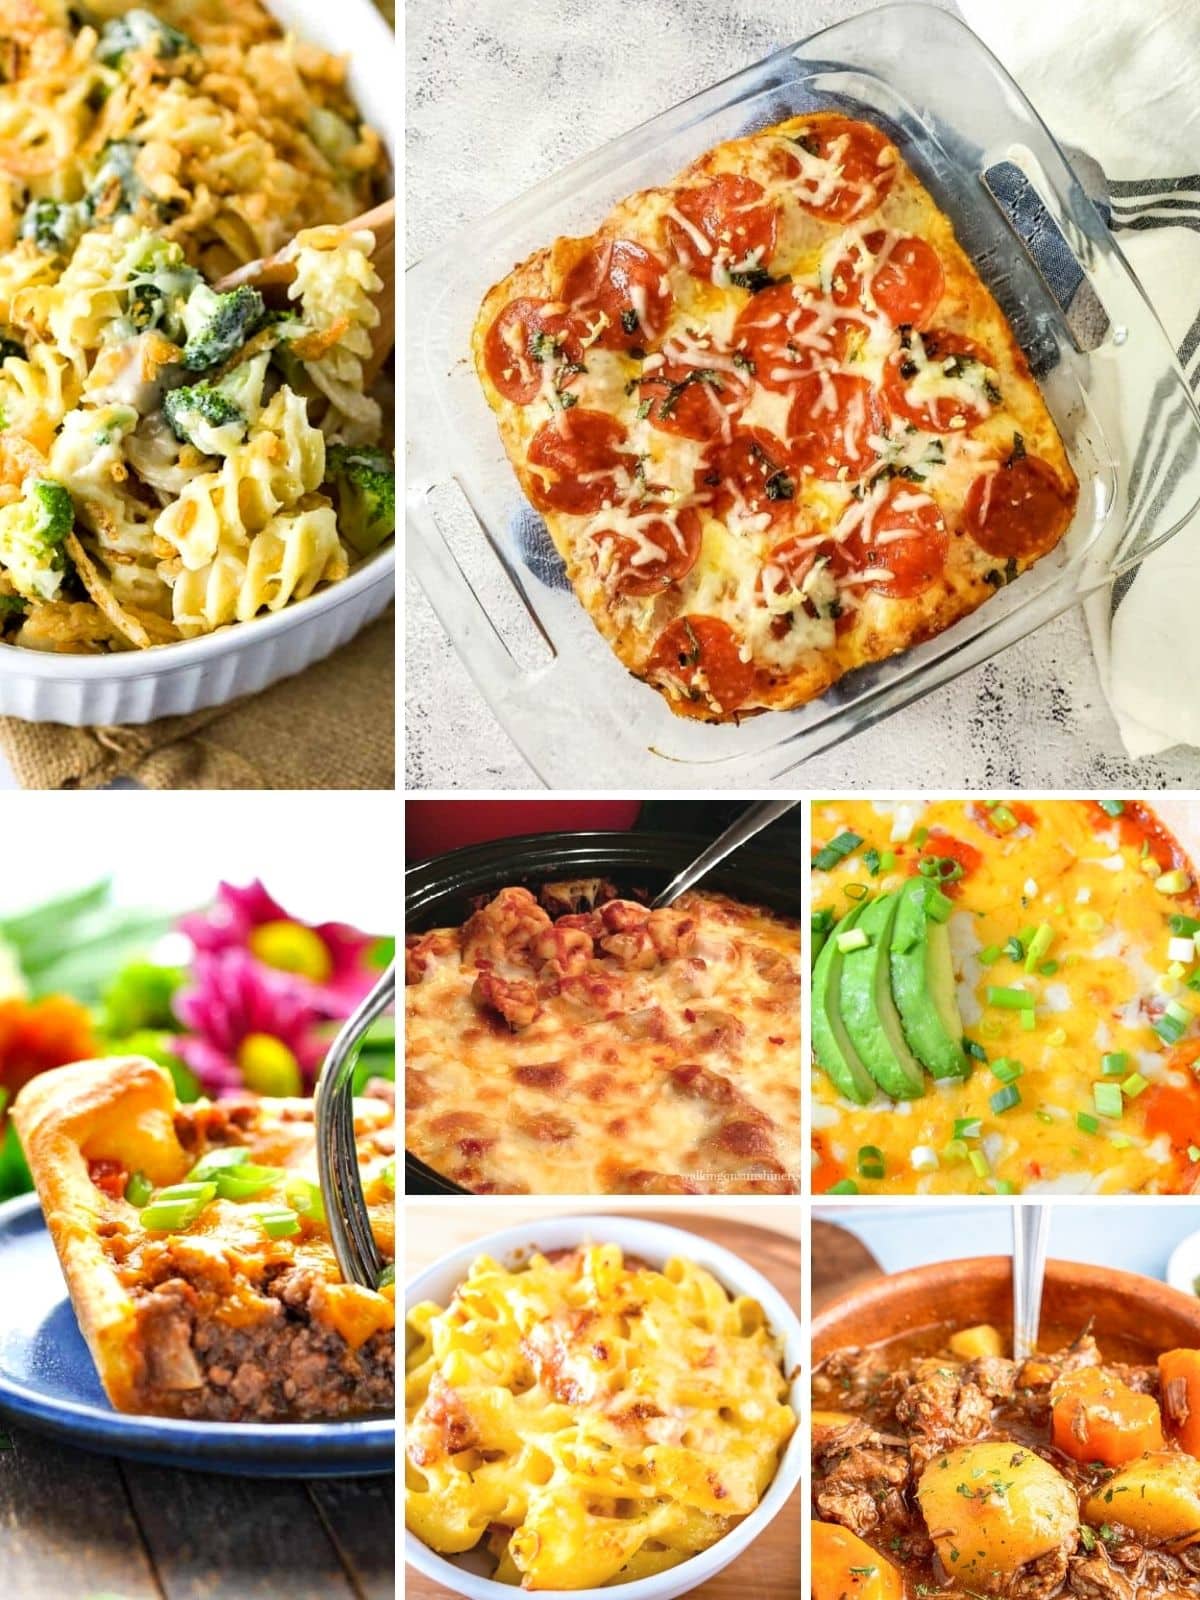 mac and cheese, pasta casserole, beef stew and other casseroles.